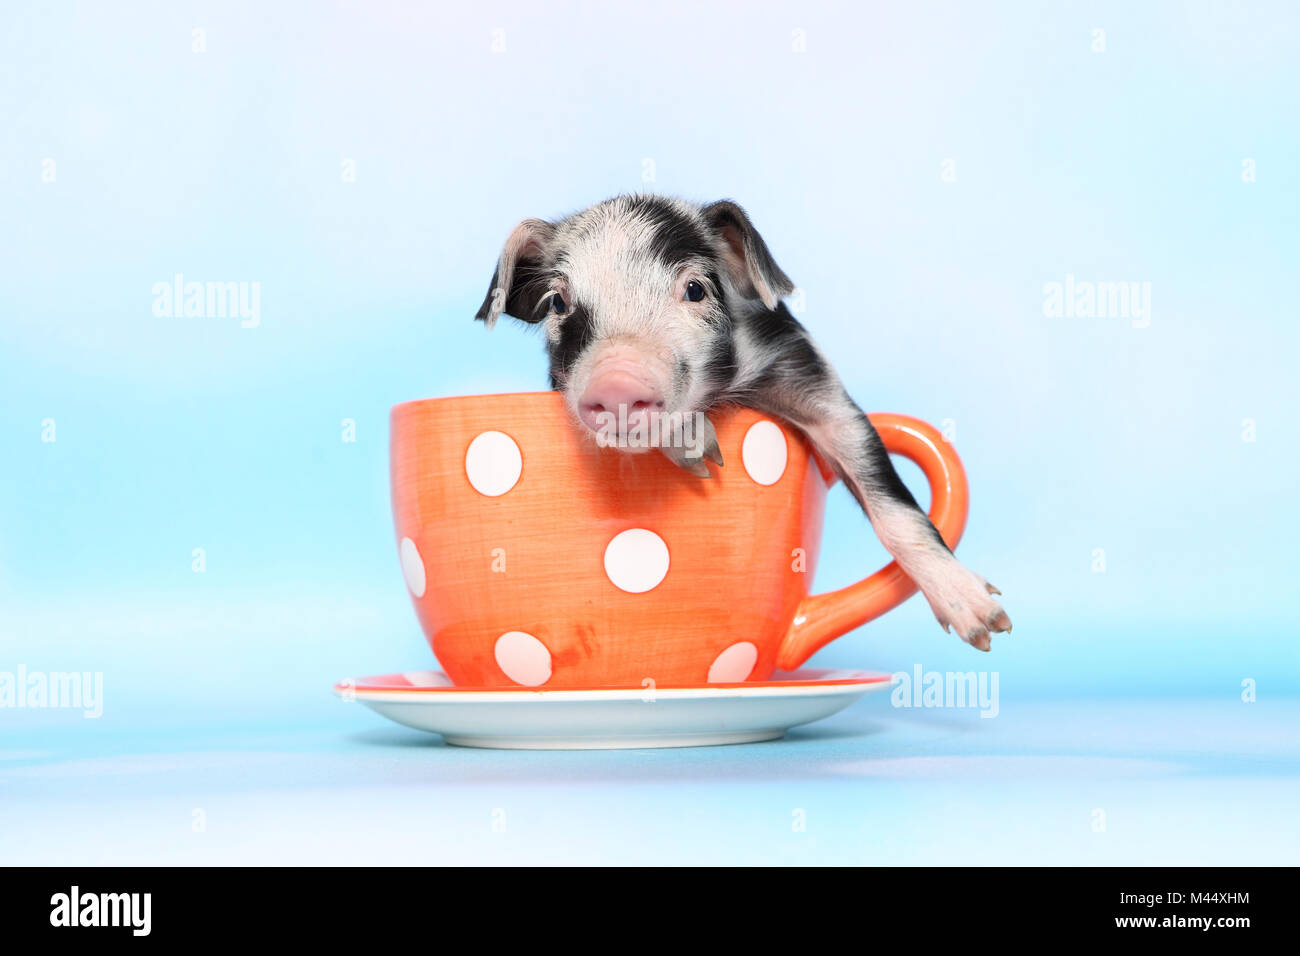 Domestic Pig, Turopolje x ?. Piglet (1 week old) in a big orange cup with polka dots. Studio picture seen against a light blue background. Germany Stock Photo